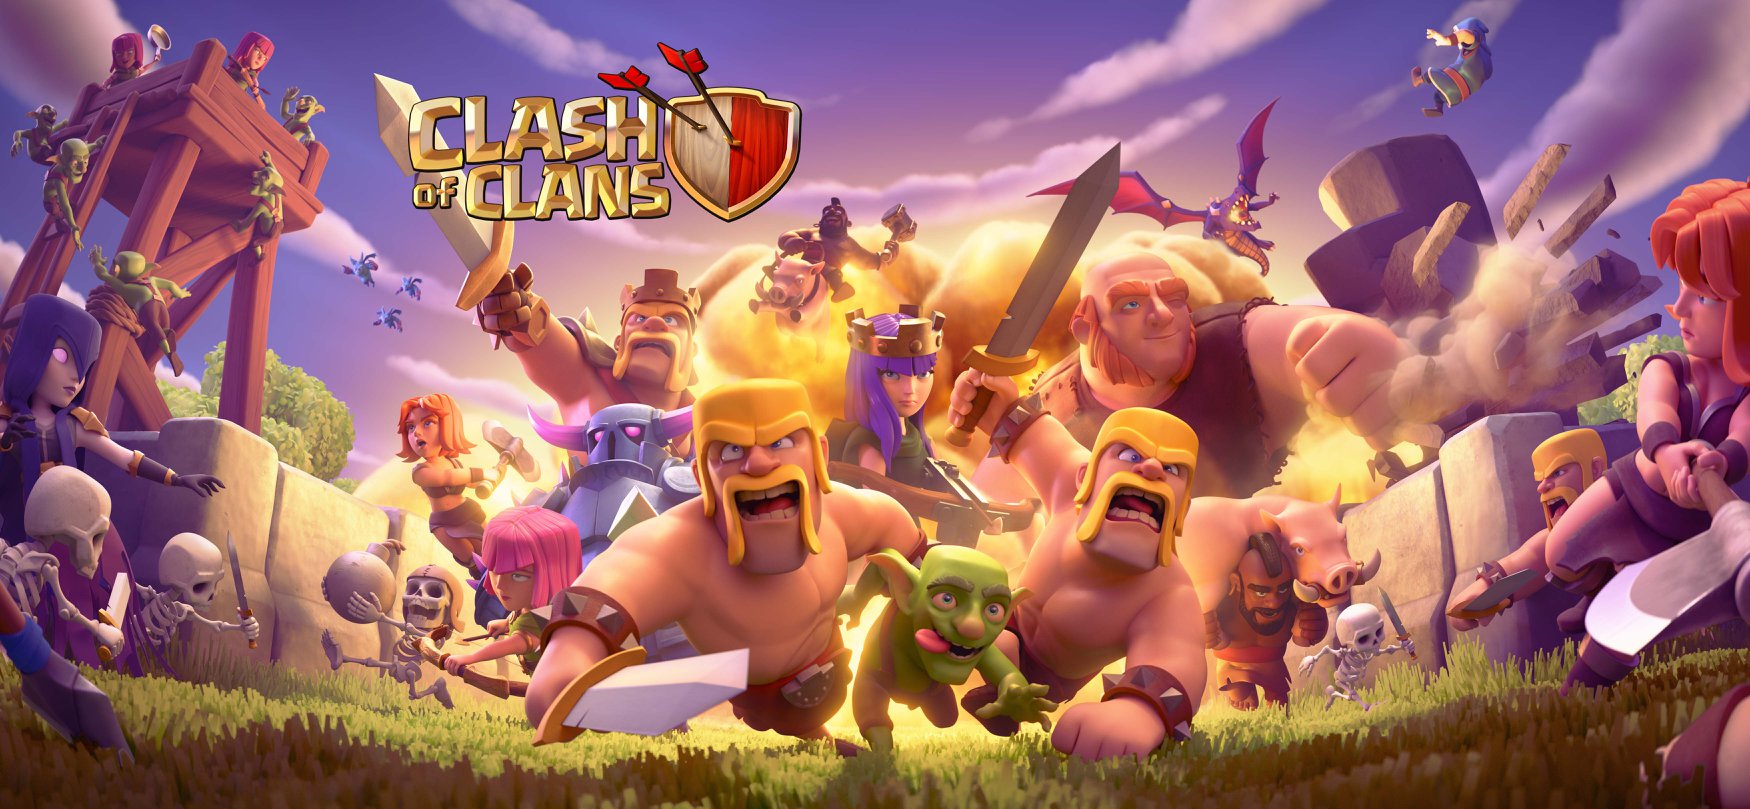 Clash of Clans' spring update reduces costs, makes quality of life improvements - Esports